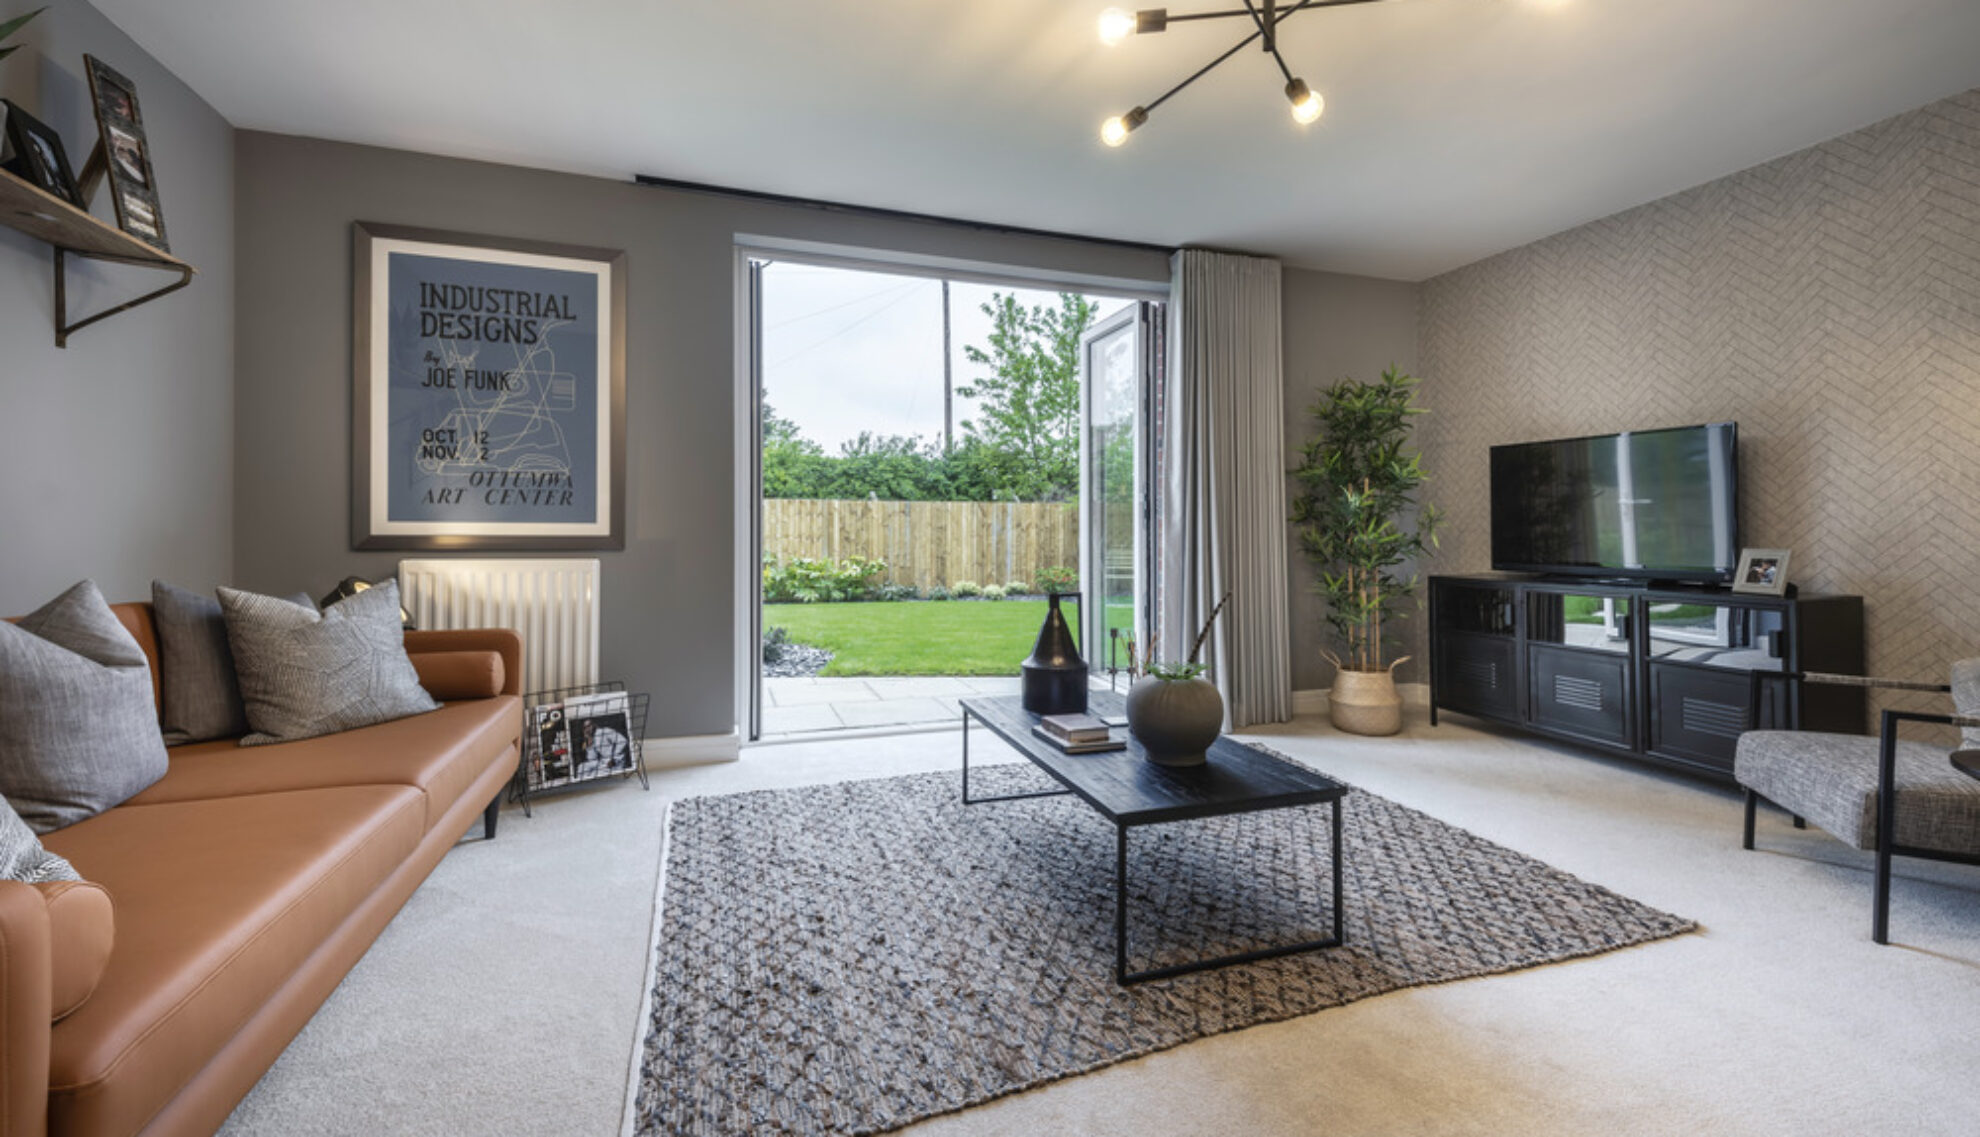 Collingsgate new build homes in the East Midlands